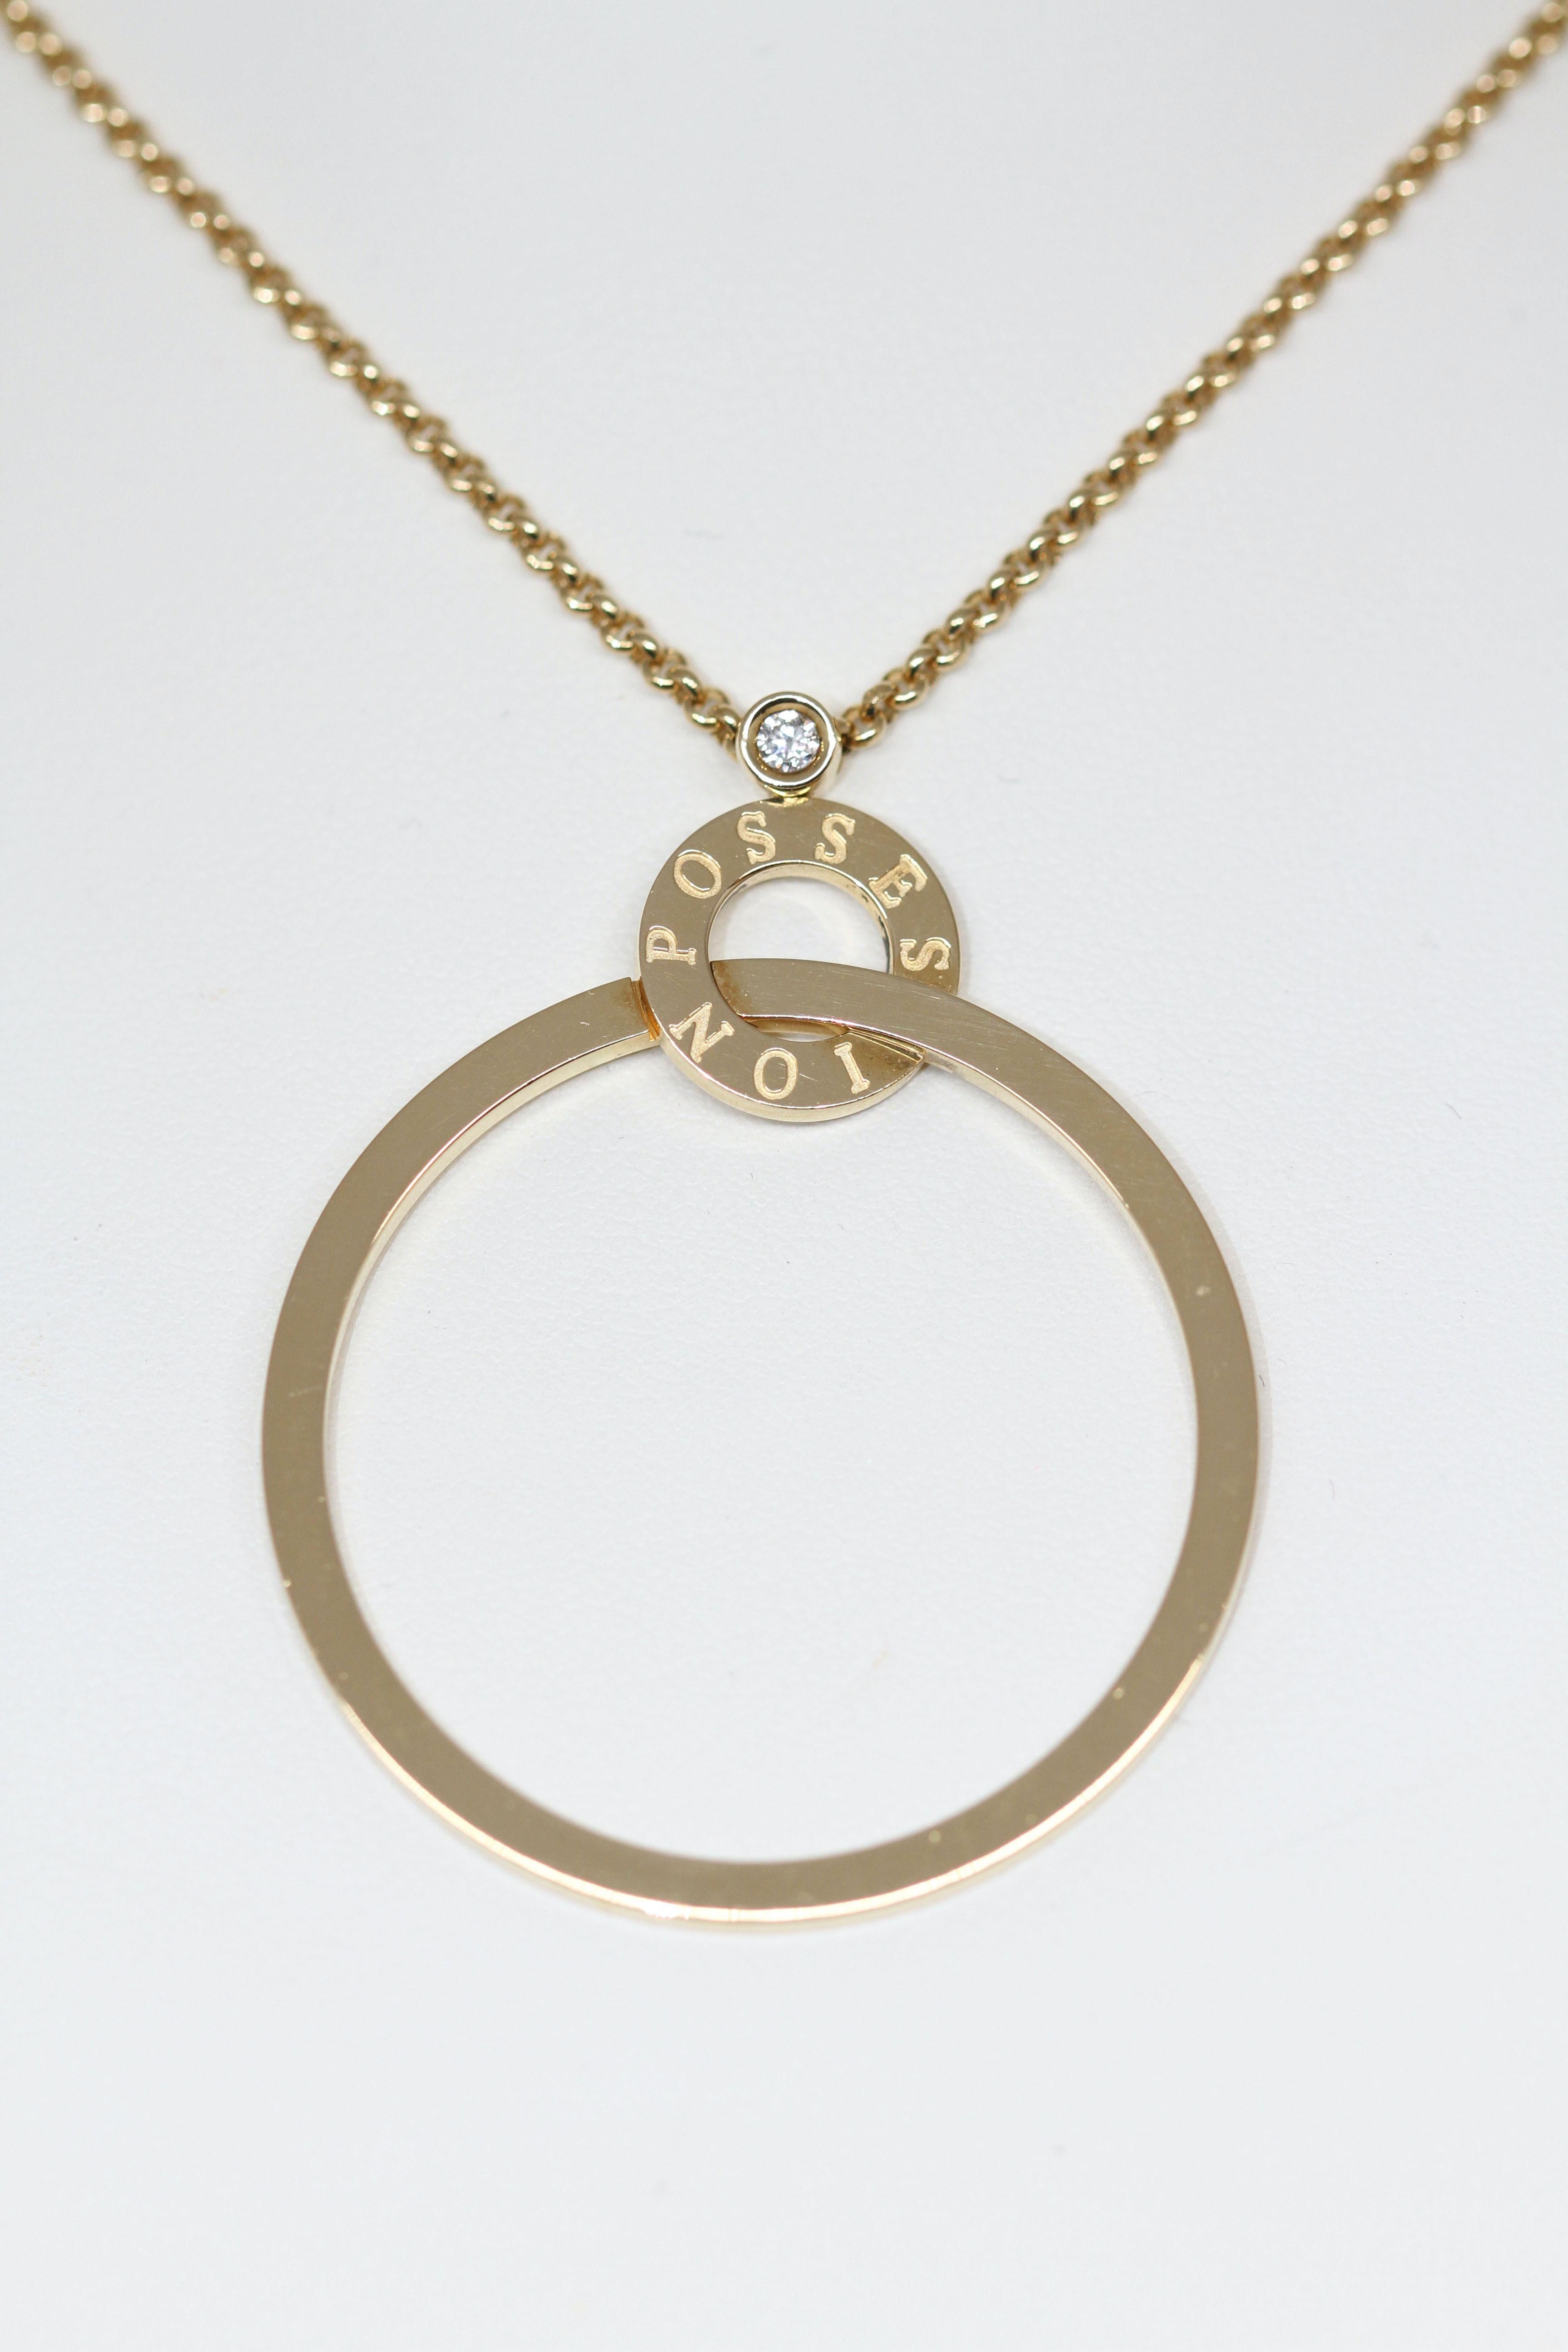 This elegant Possession necklace from Piaget is made in 18K yellow gold. 
It is composed of one engraved ring Possession in yellow gold holding a large gold ring.
The pattern is enhanced with one beautiful diamond on the top - brilliant cut approx.